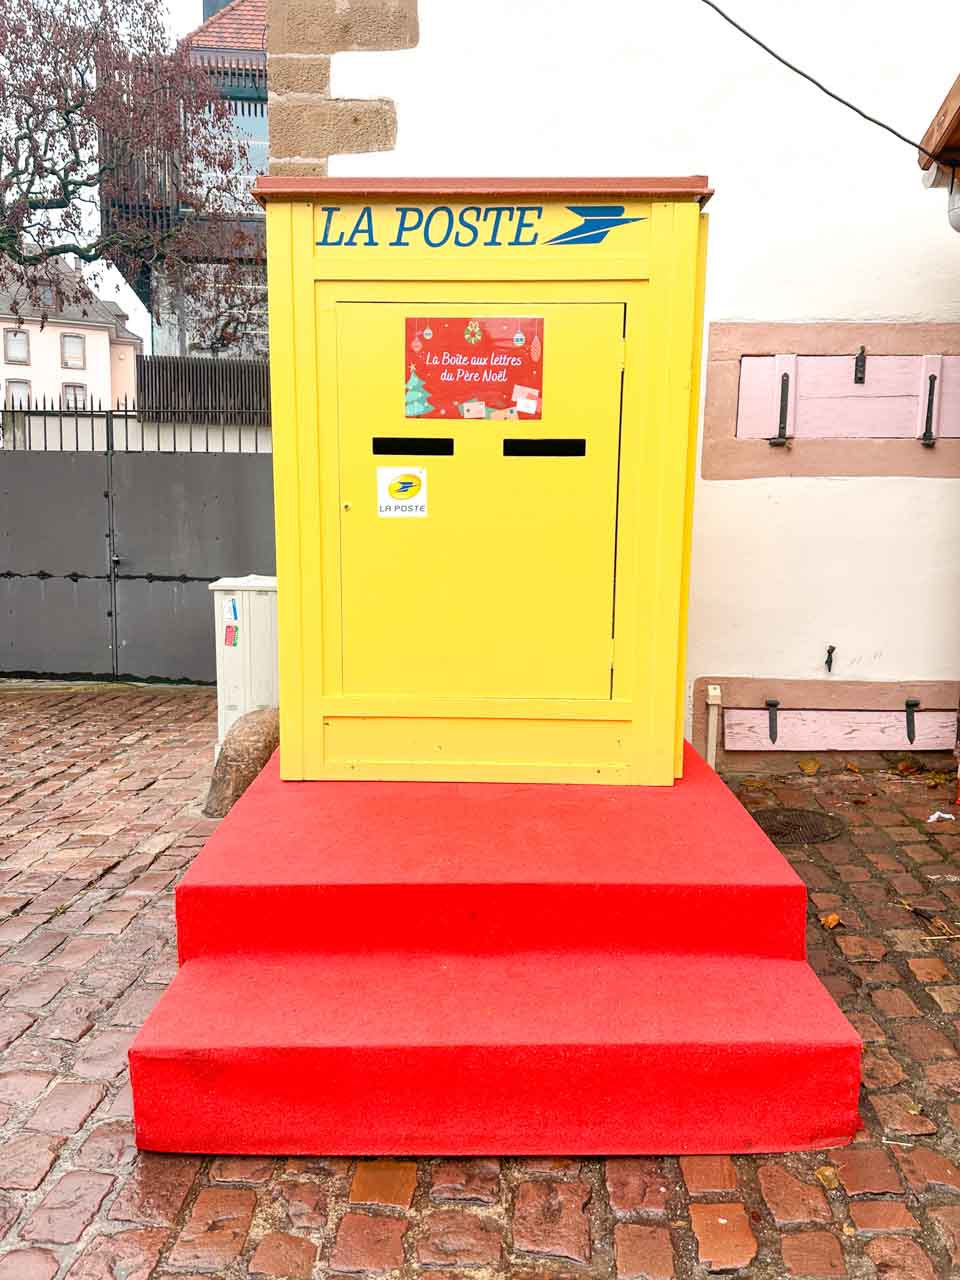 A bright yellow postbox on red steps labelled 'LA POSTE', with a festive sign for Santa's mail, stands out on a cobblestone street in Colmar